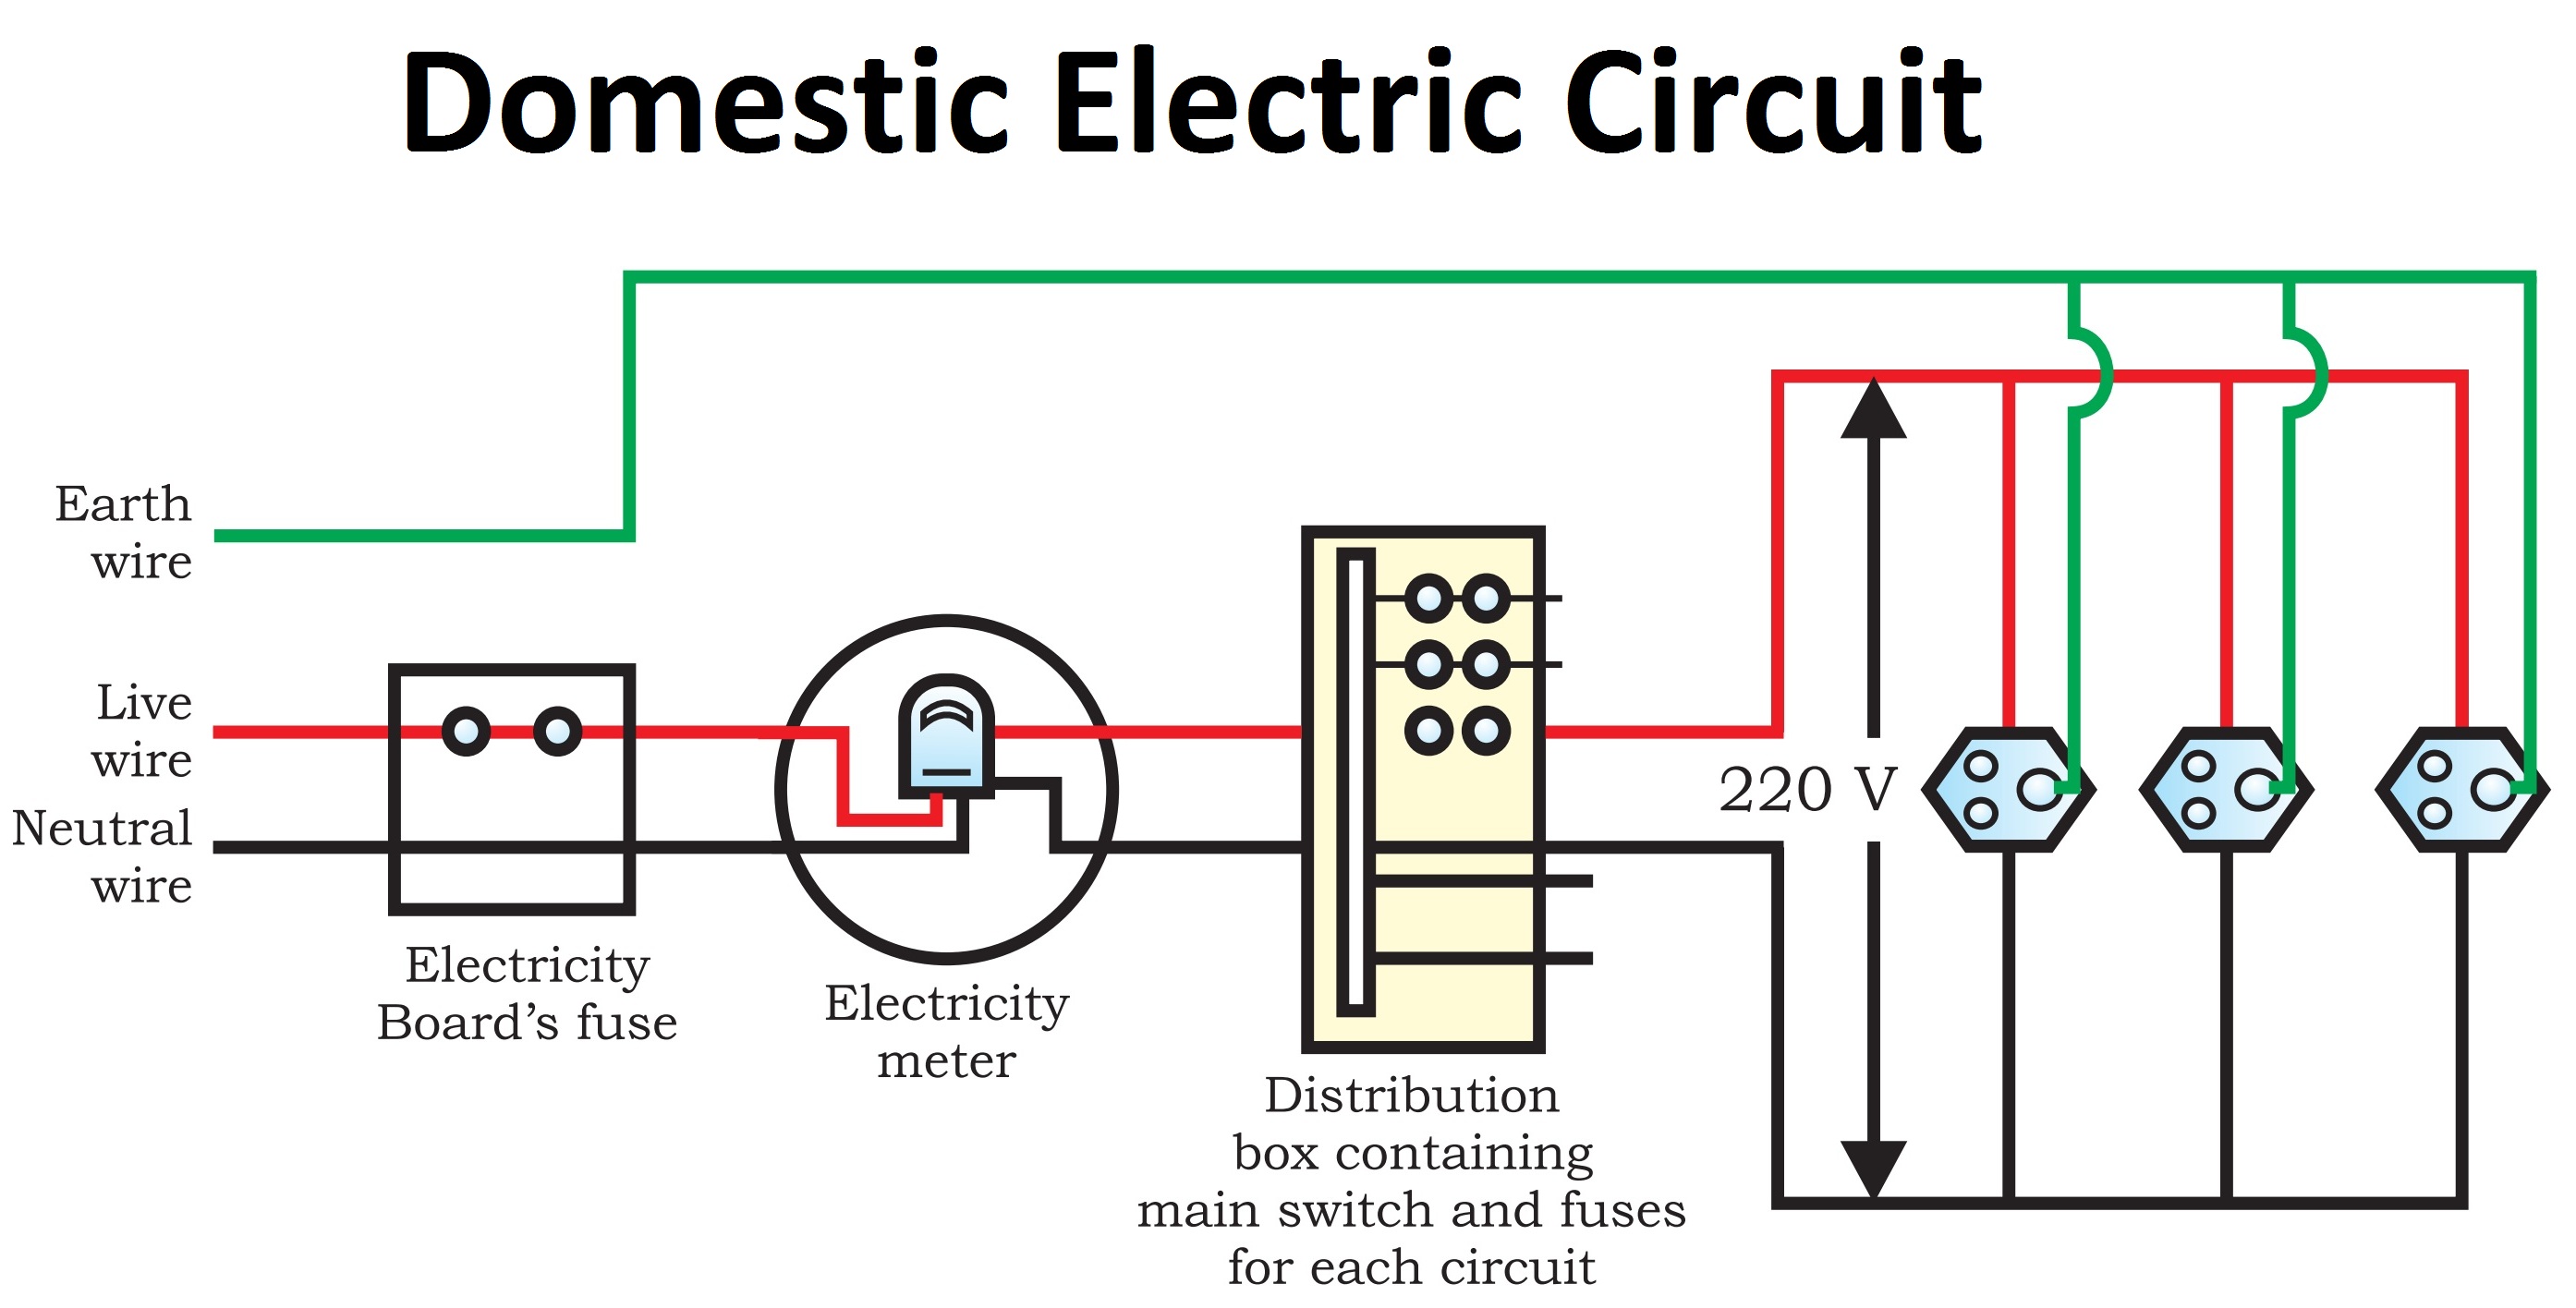 Domestic Electric Circuit - Diagram, Wires, Fuse - Class ...